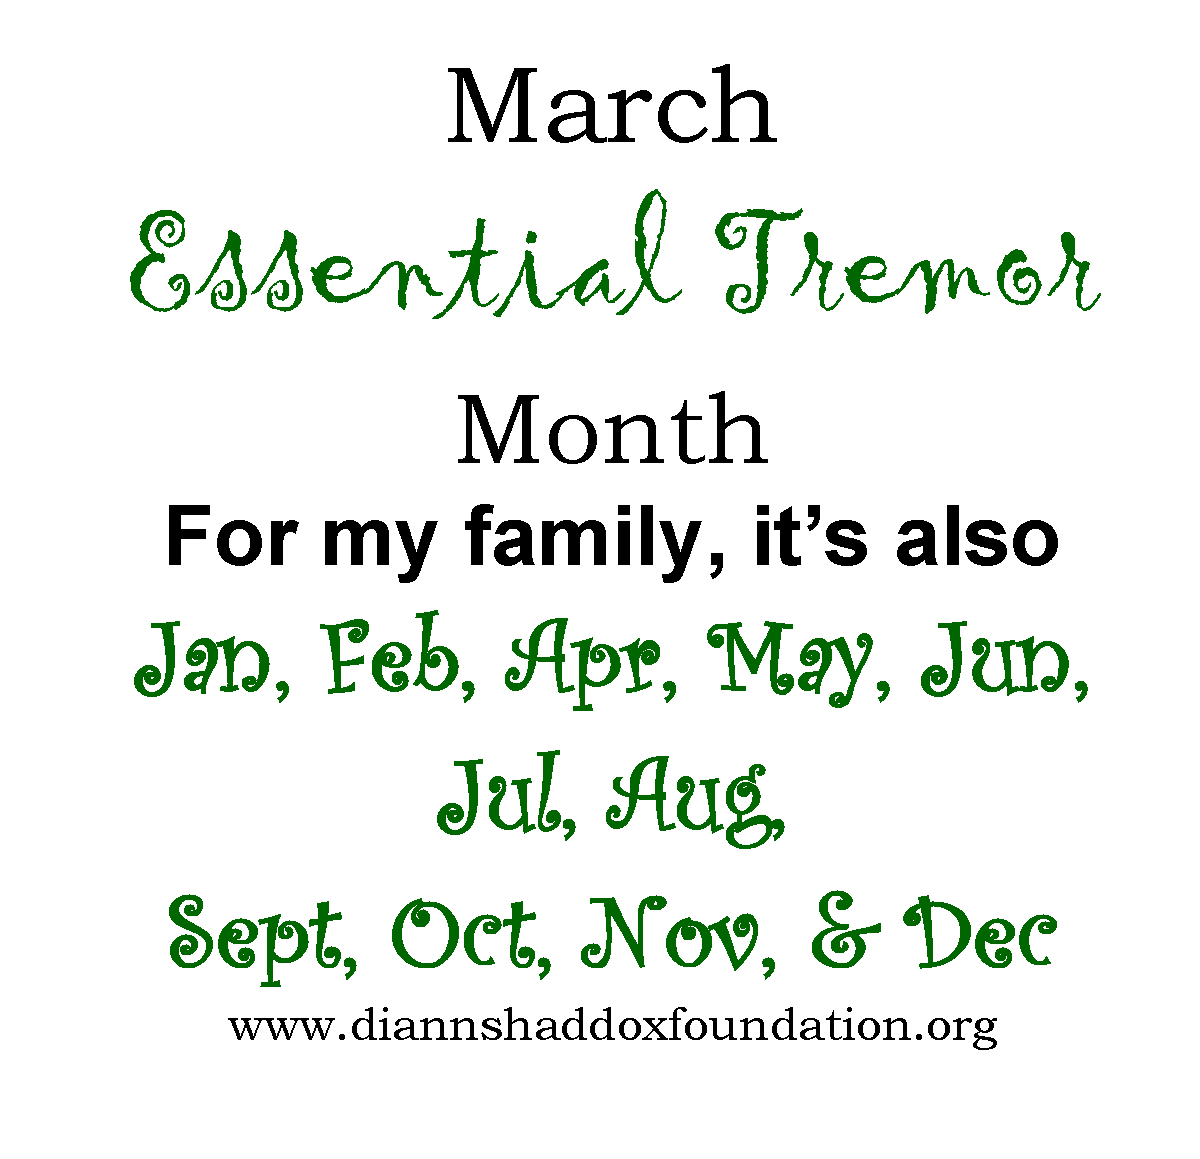 March #essentialtremor Month for my family, it's also Jan, Feb, April, May, June, July, Aug, Sept, Oct, Nov, & Dec. #teamdsf #endet